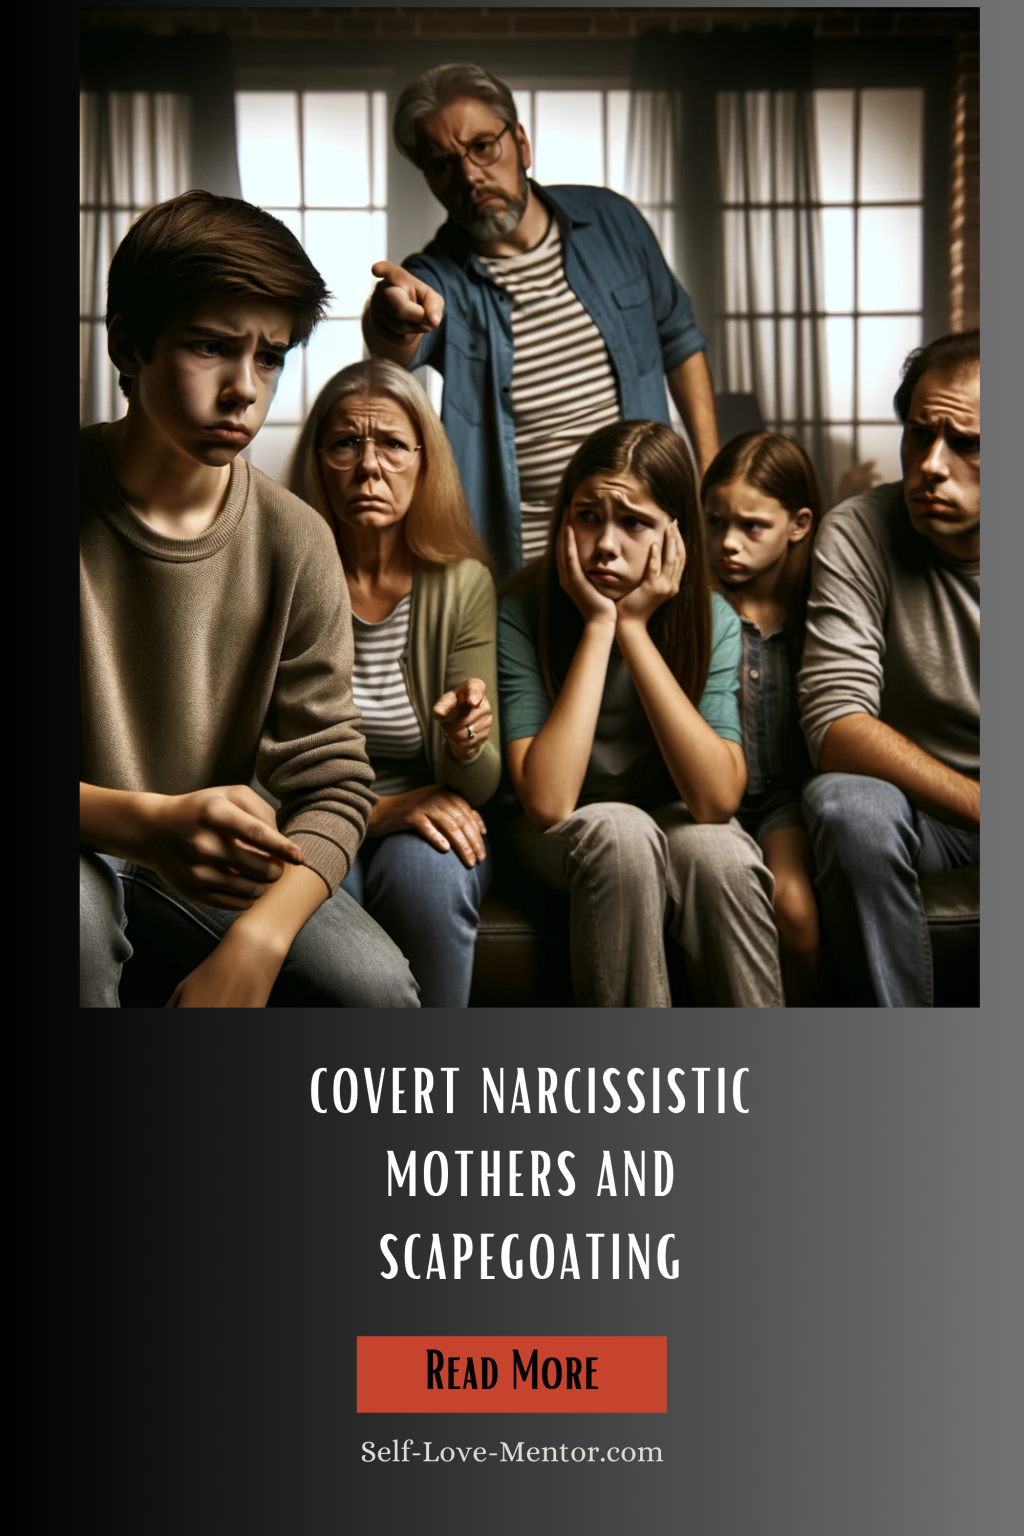 Covert Narcissistic Mothers and Scapegoating